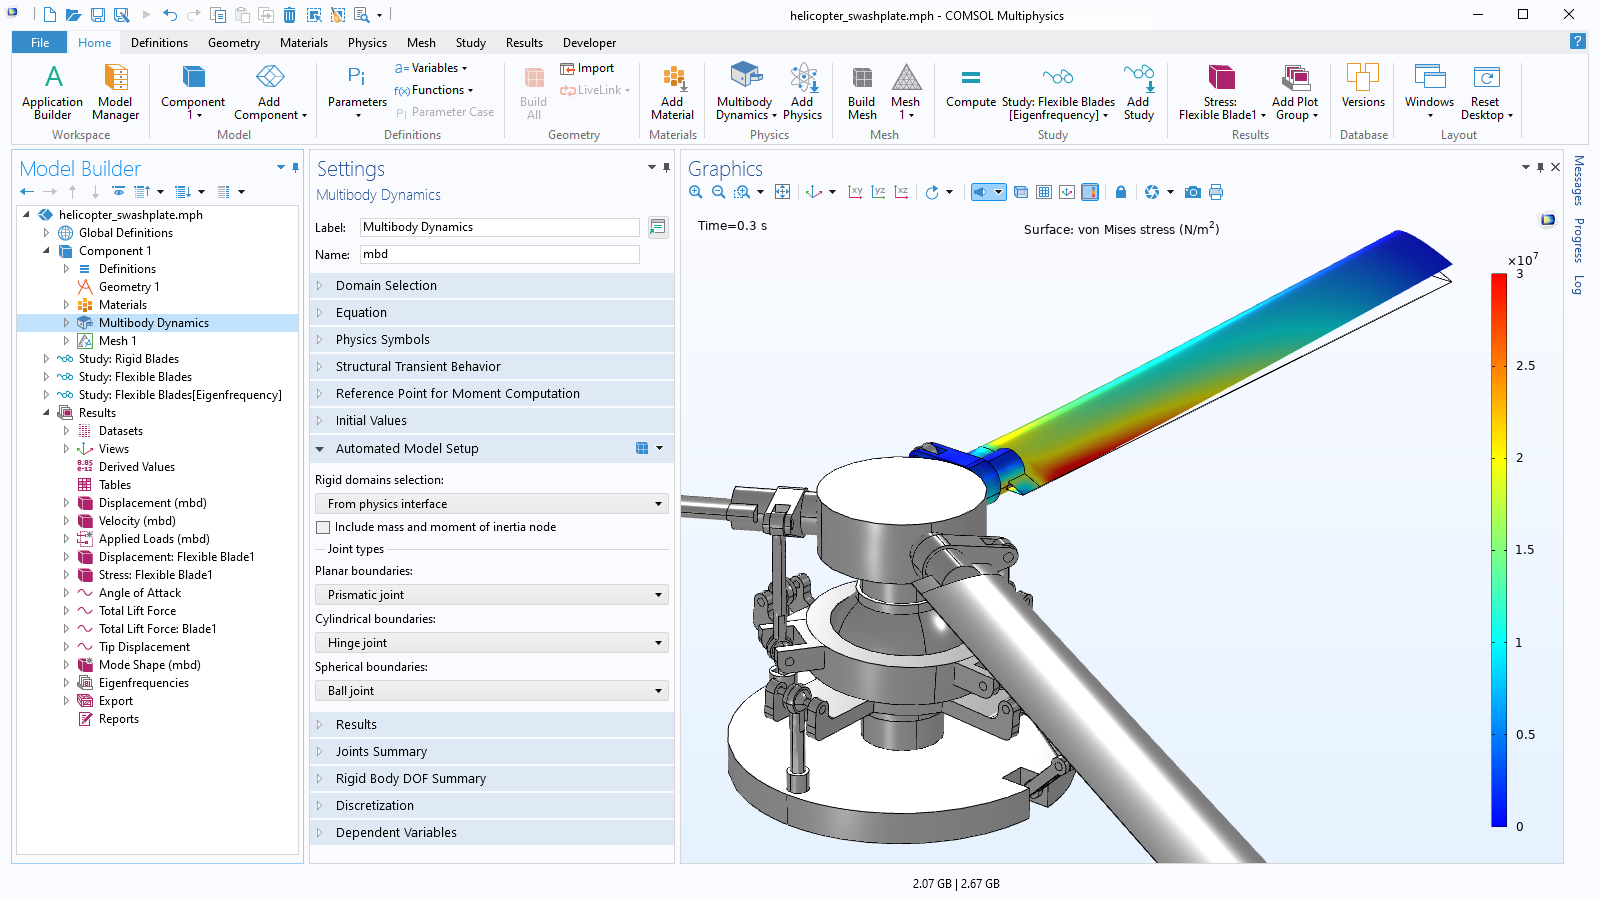 The COMSOL Multiphysics UI showing the Model Builder with the Multibody Dynamics node highlighted, the corresponding Settings window, and a helicopter swashplate model in the Graphics window.